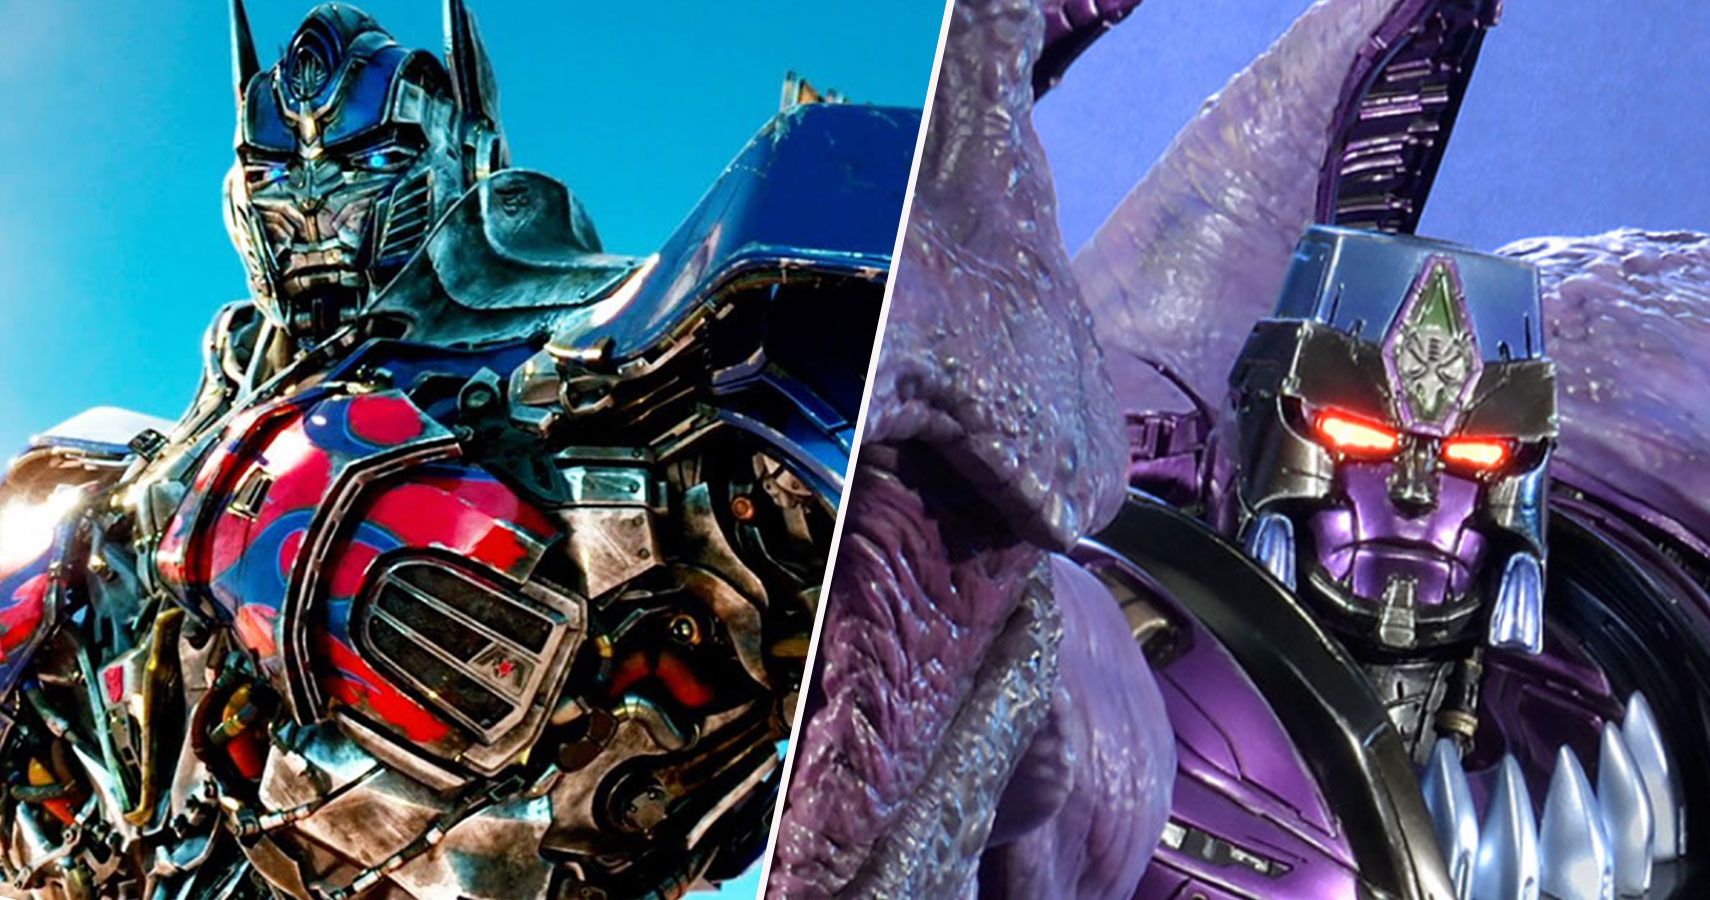 Can Optimus Prime (Transformers Prime) survive in the hollow Earth